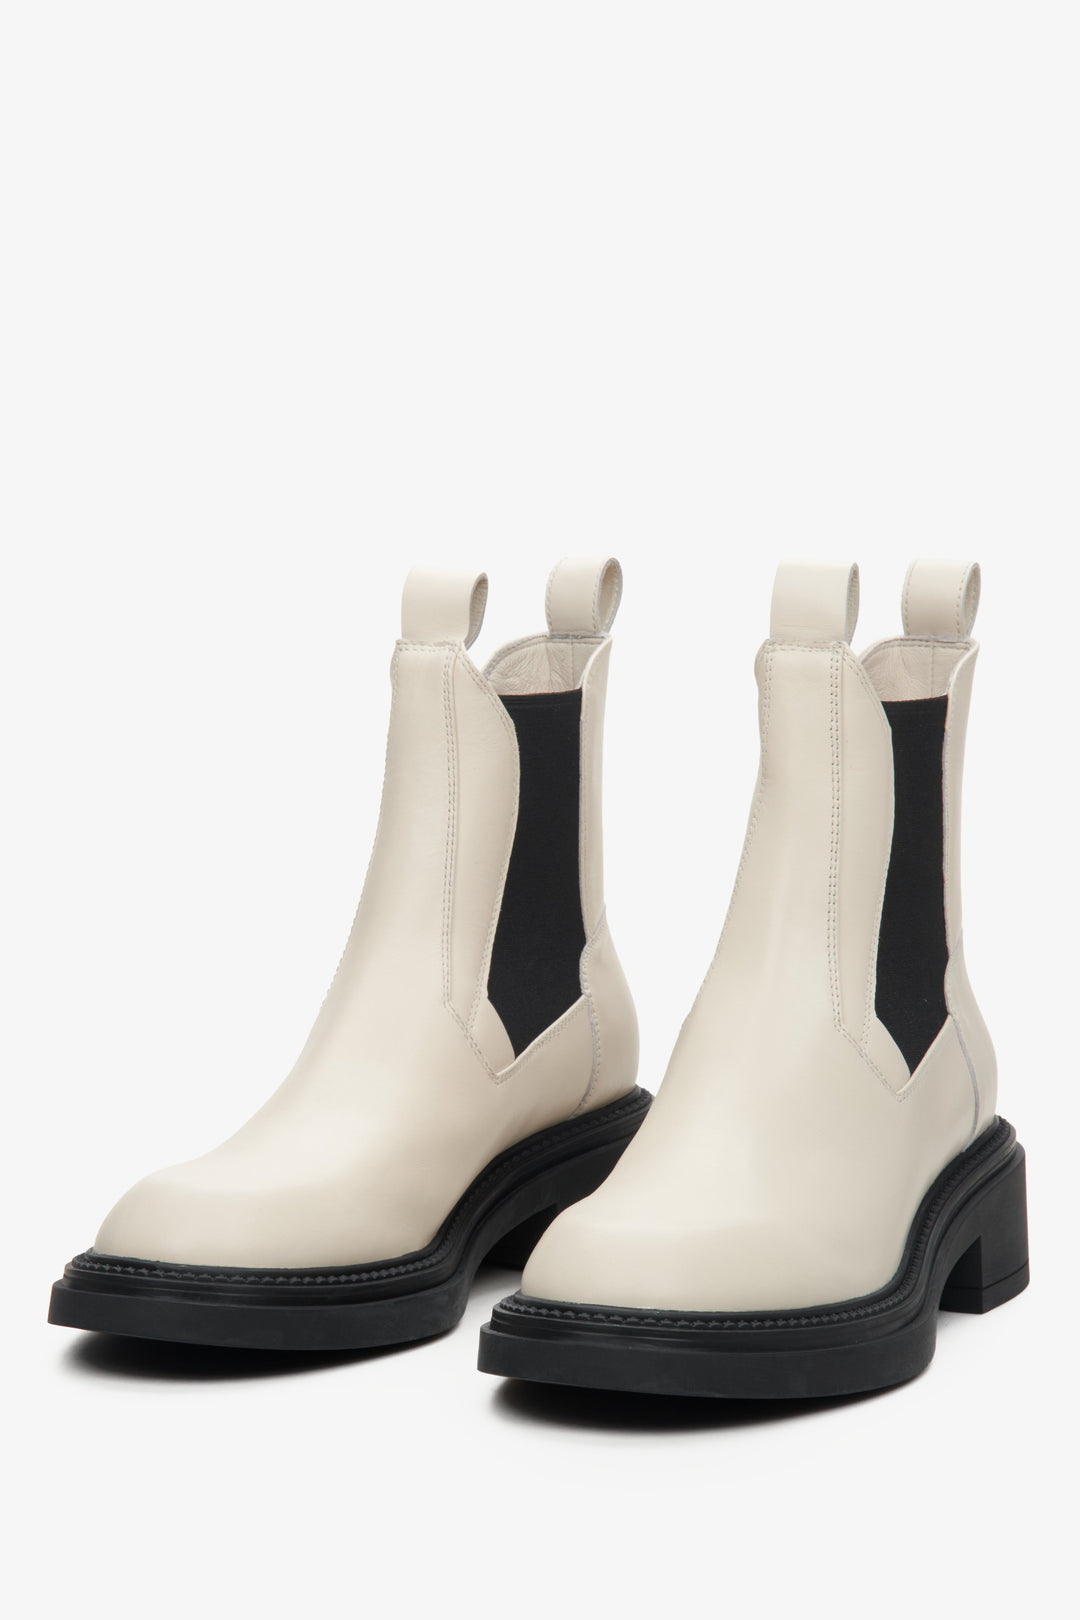 Comfy women's beige and black leather Chelsea boots.